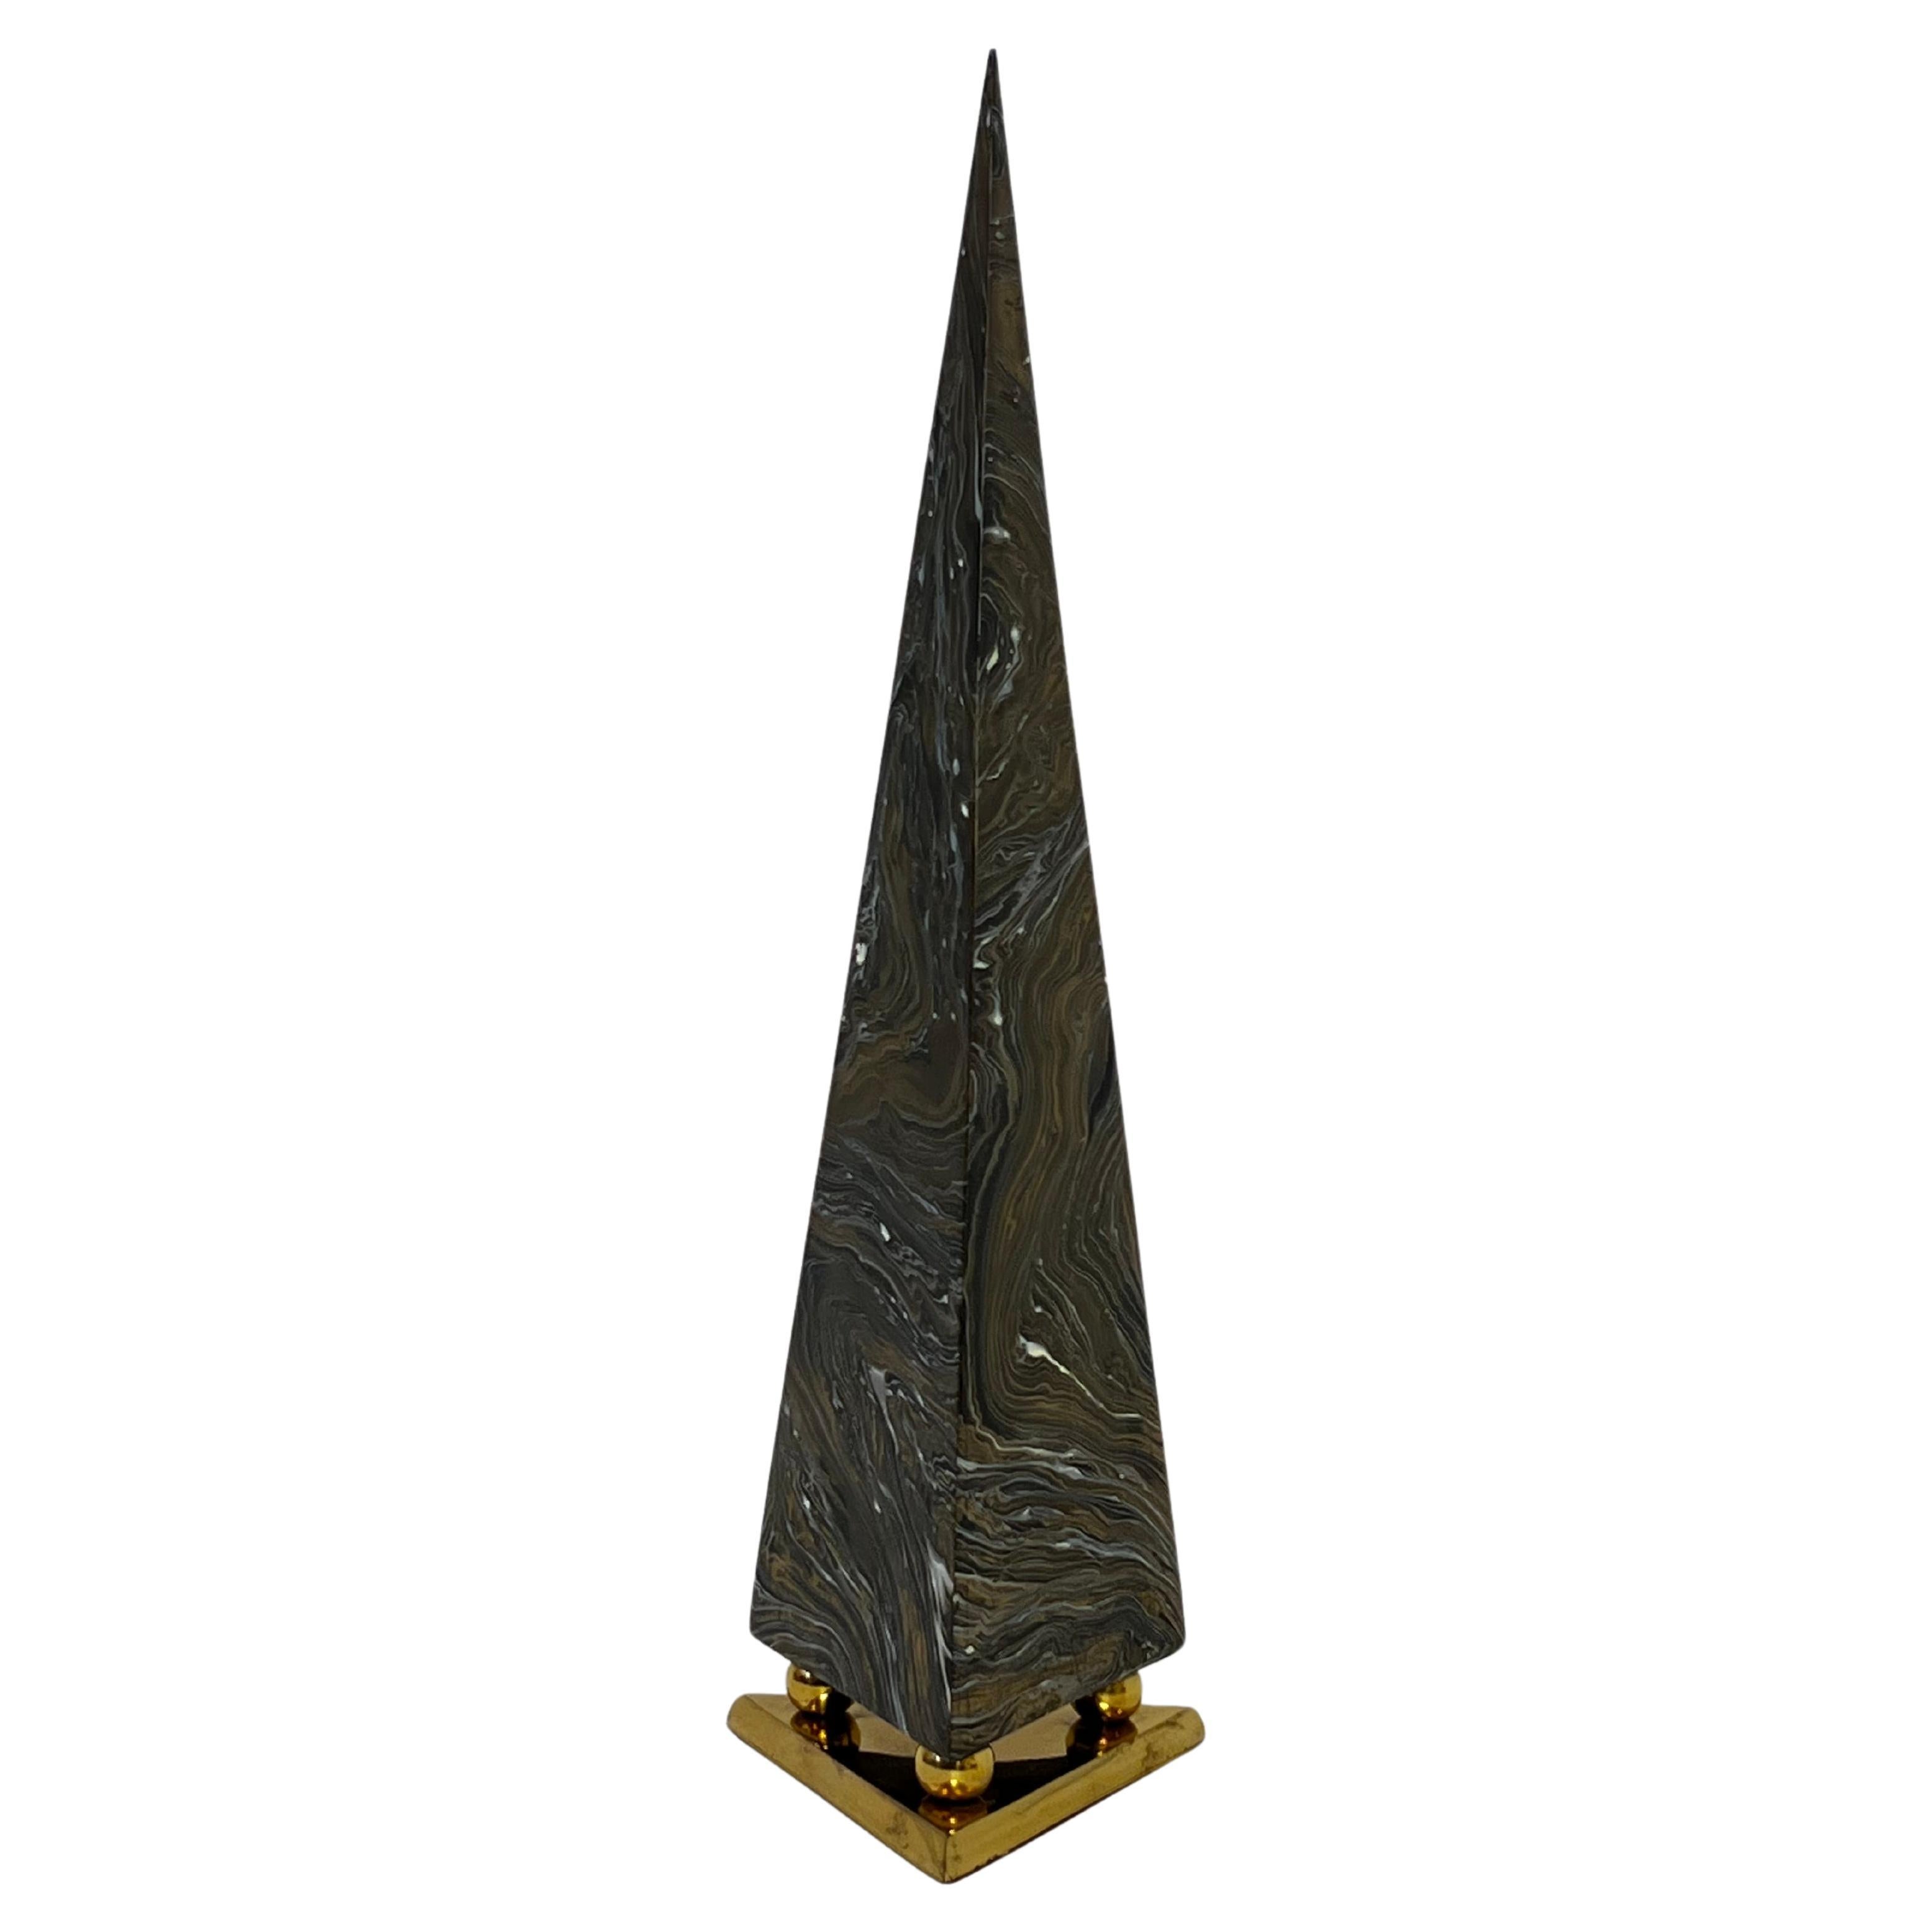 1970’s marbleized brass pyramid obelisk  attributed to Maitland Smith. 

In original vintage condition shows minor wear consistent with age(see detail photos). 